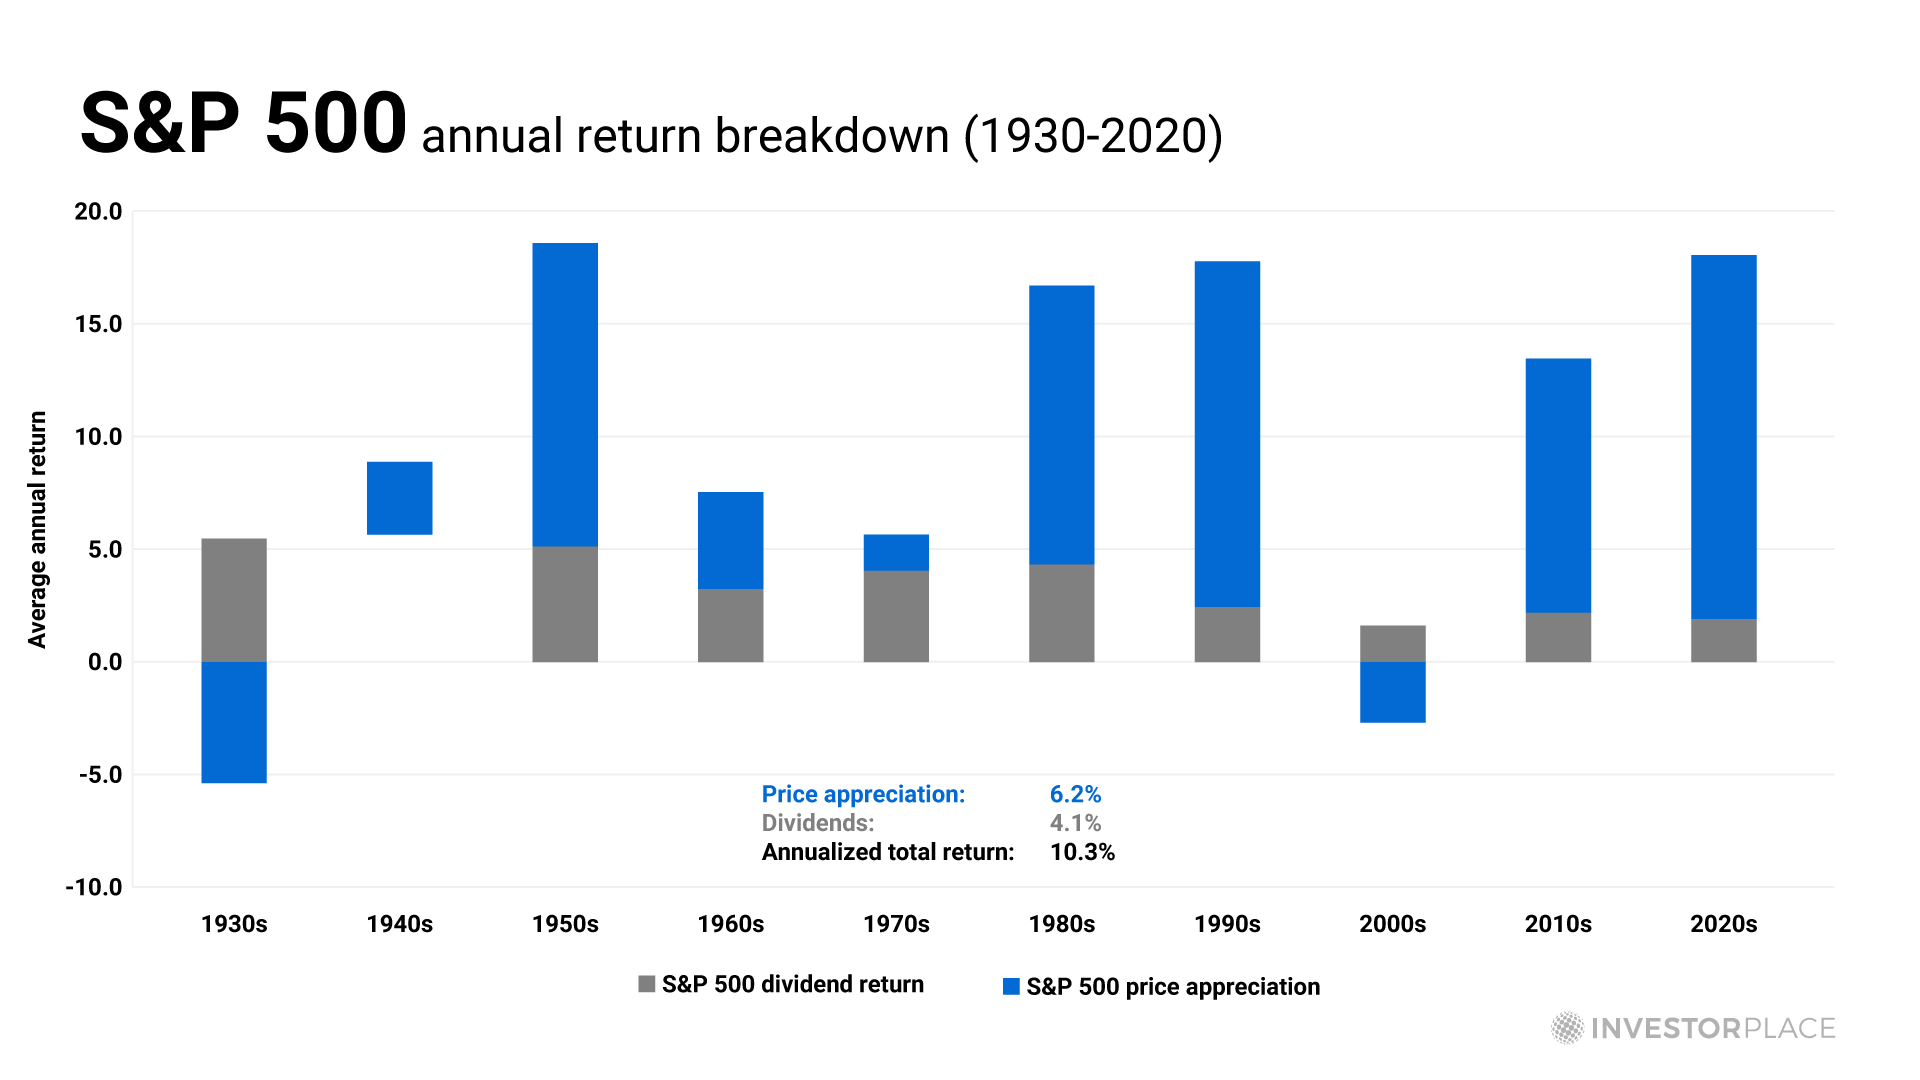 A chart showing the breakdown of gains in the S&P 500 every decade from the 1930s to the 2020s between dividends and stock price appreciation.